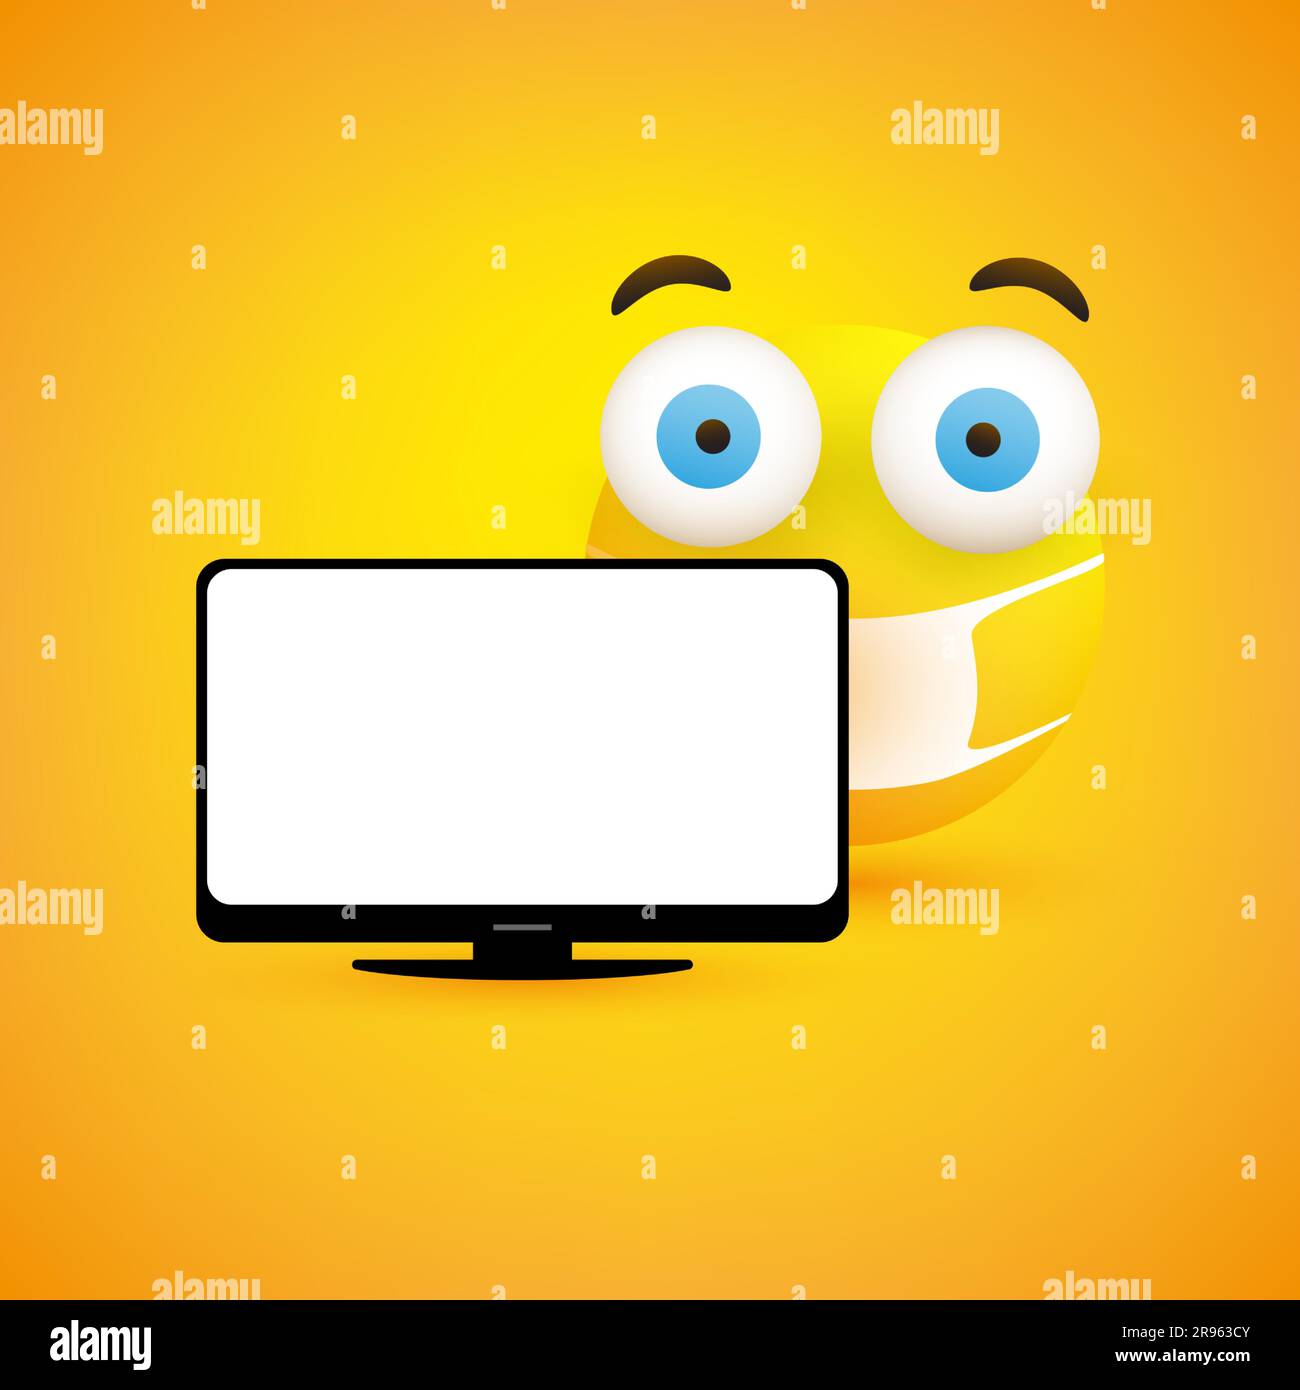 Bad News - Fearful, Anxious Concerned Emoticon with Pop Out Eyes Wearing Medical Mask Beside a Flat TV Screen - Vector Design Concept Stock Vector